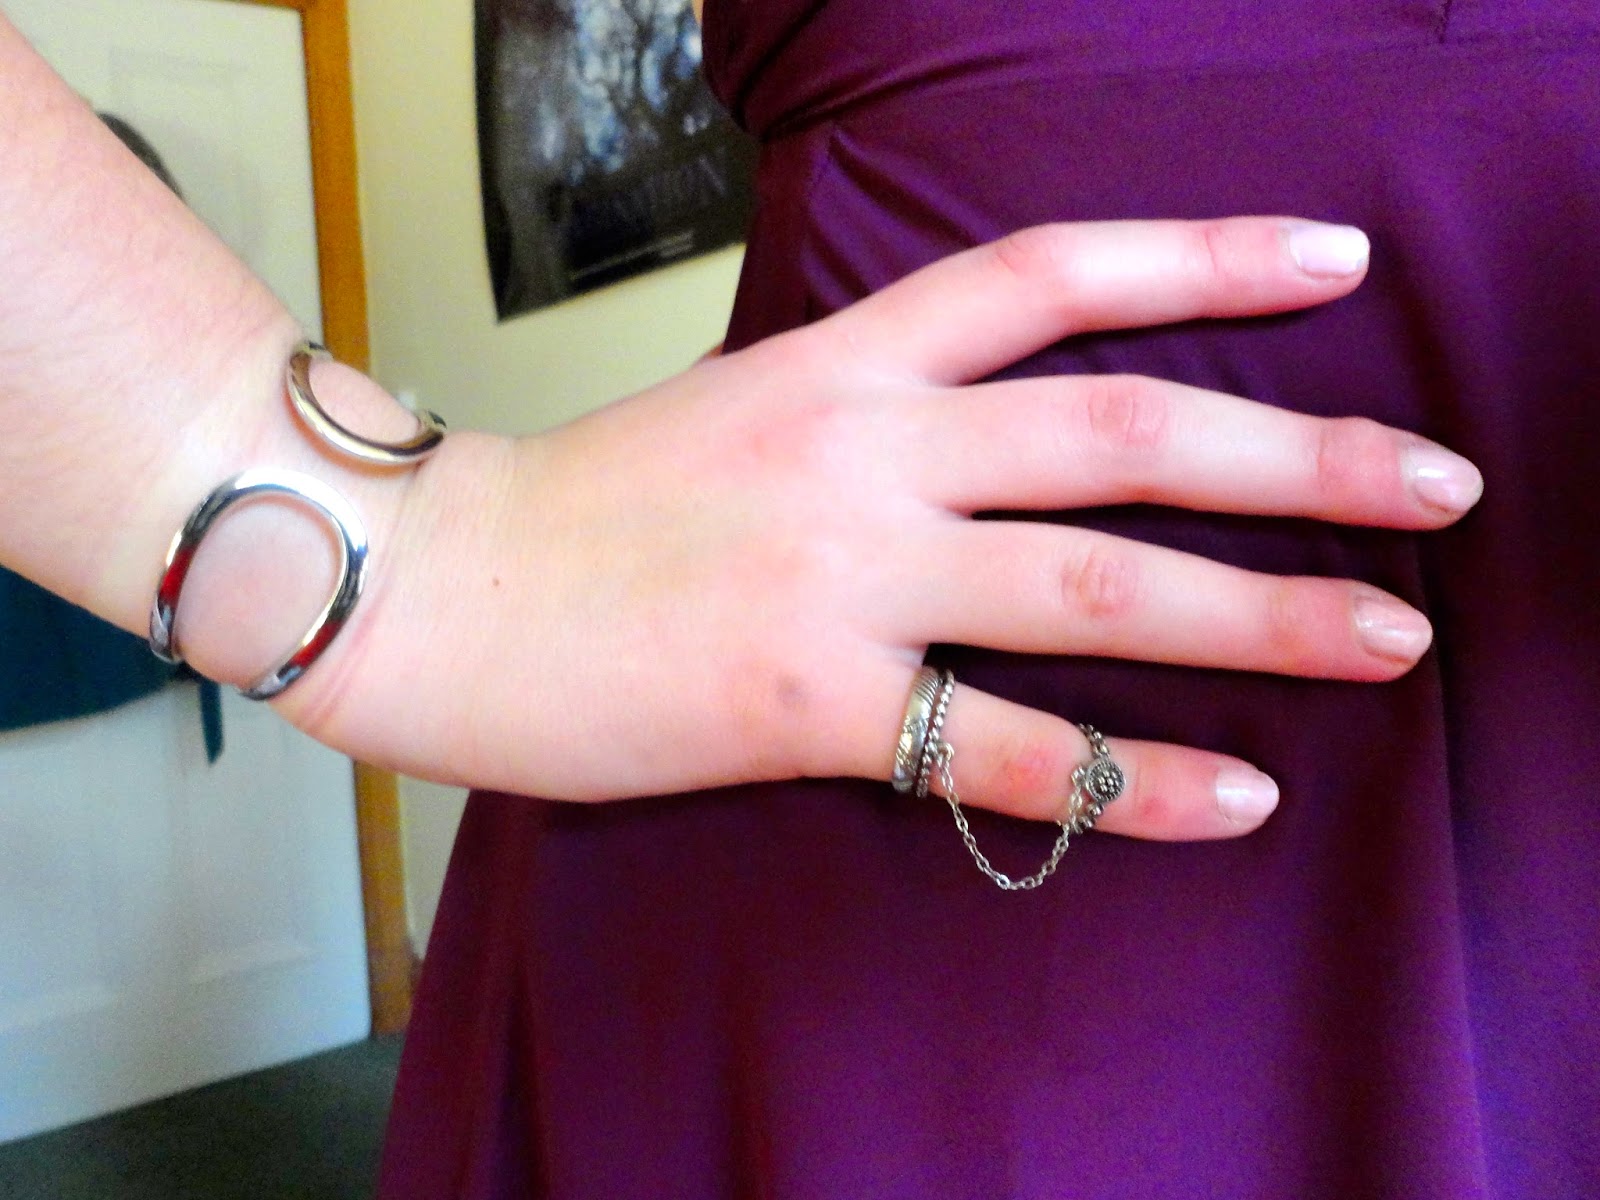 silver metal bracelet and double chained rings, with pink nail polish over purple dress